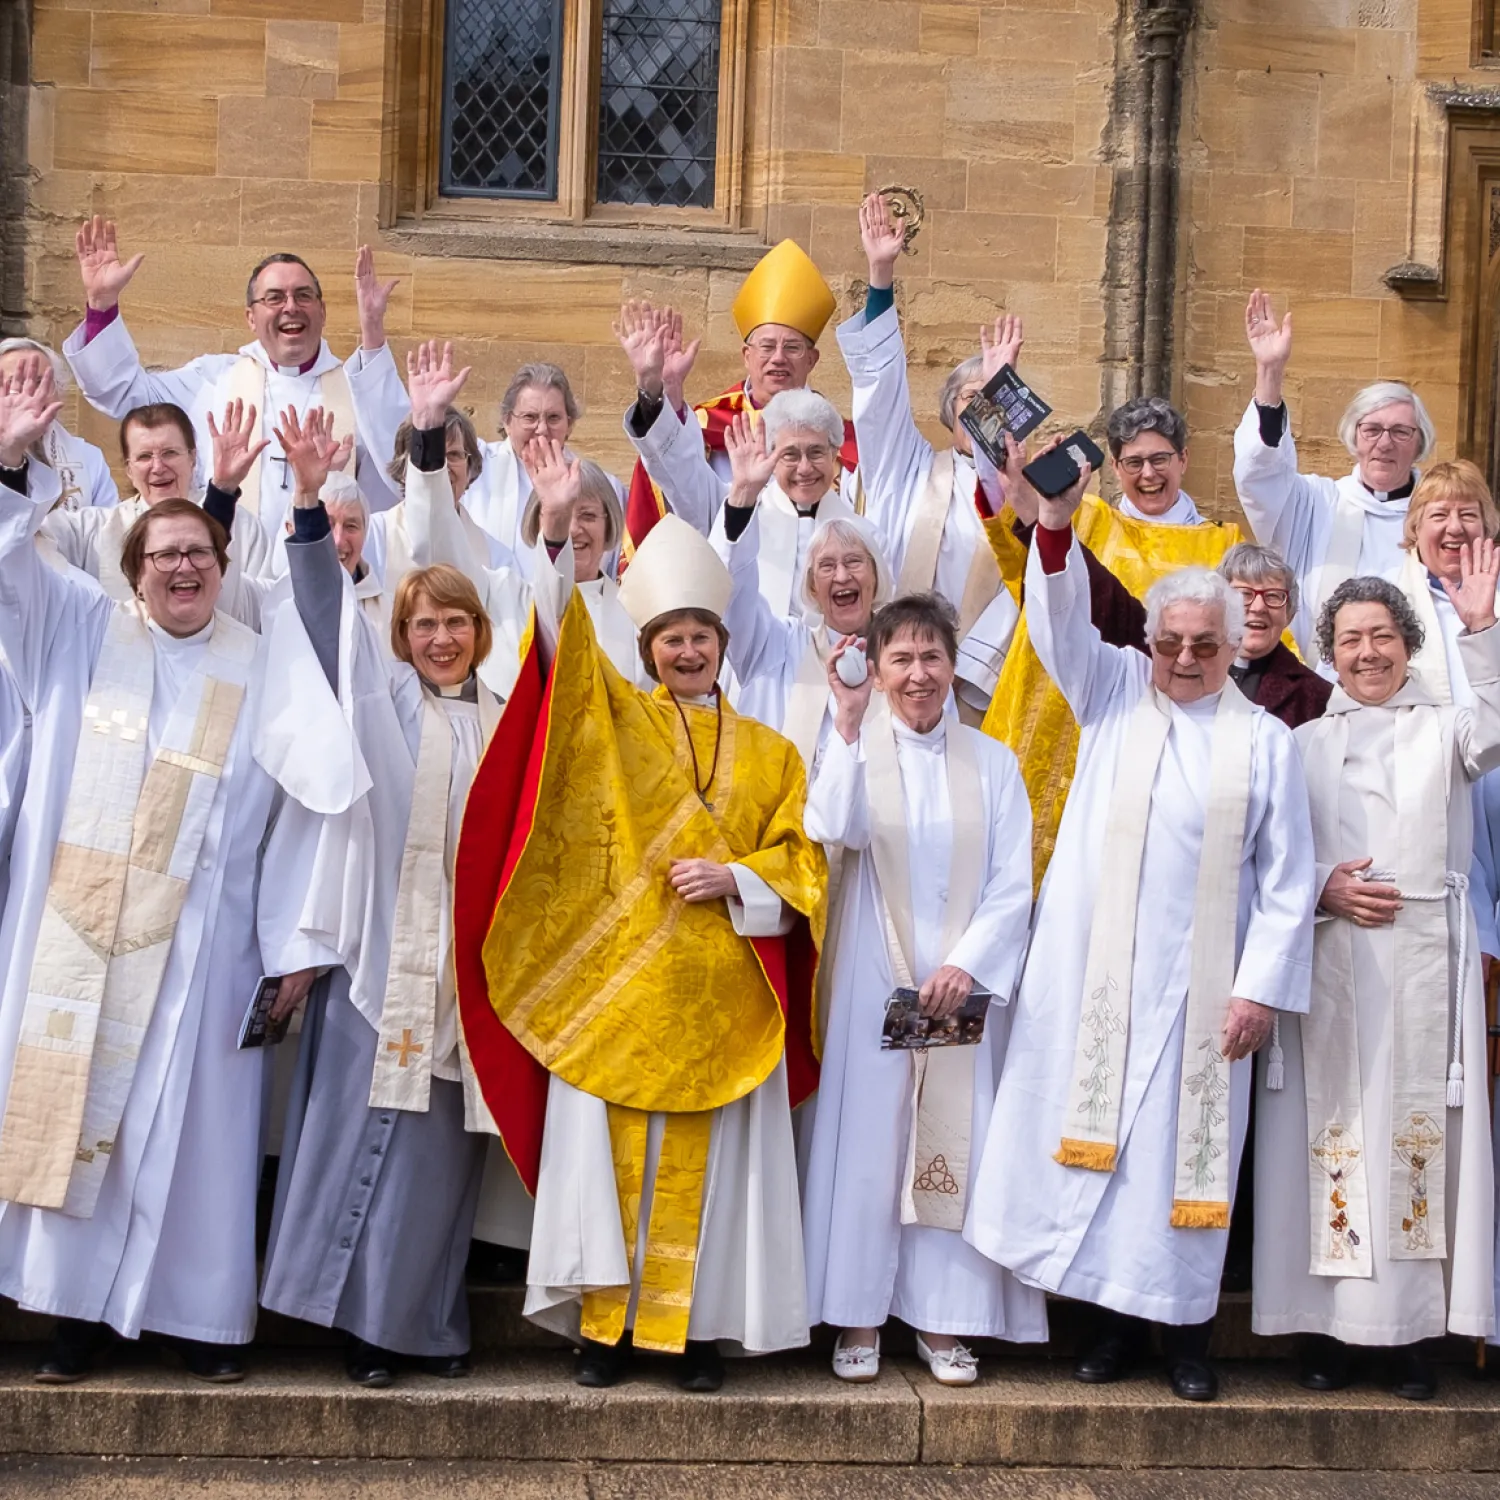 A large group of women ordained in 1994 are gathered wearing albs and stoles, and joined by Bishops Olivia Graham, Steven Croft and Gavin Collins. The first female Dean of Christ Church, Sarah Foot, is also present. They are waving and looking thrilled that women triumphed over discrimination to flourish in spirit and ministry.